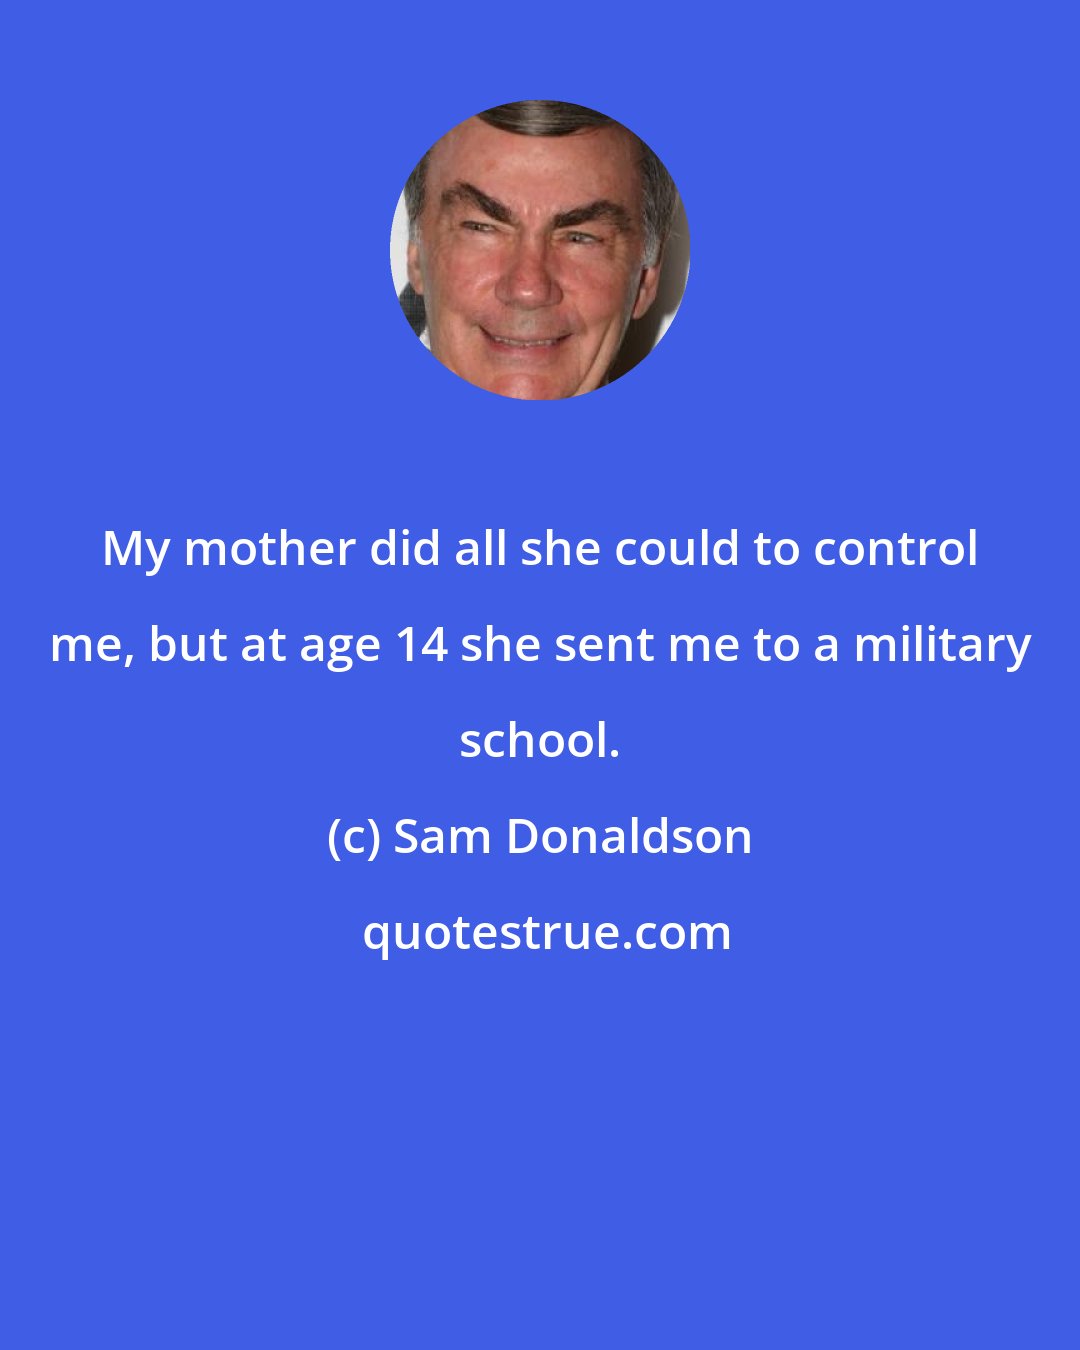 Sam Donaldson: My mother did all she could to control me, but at age 14 she sent me to a military school.